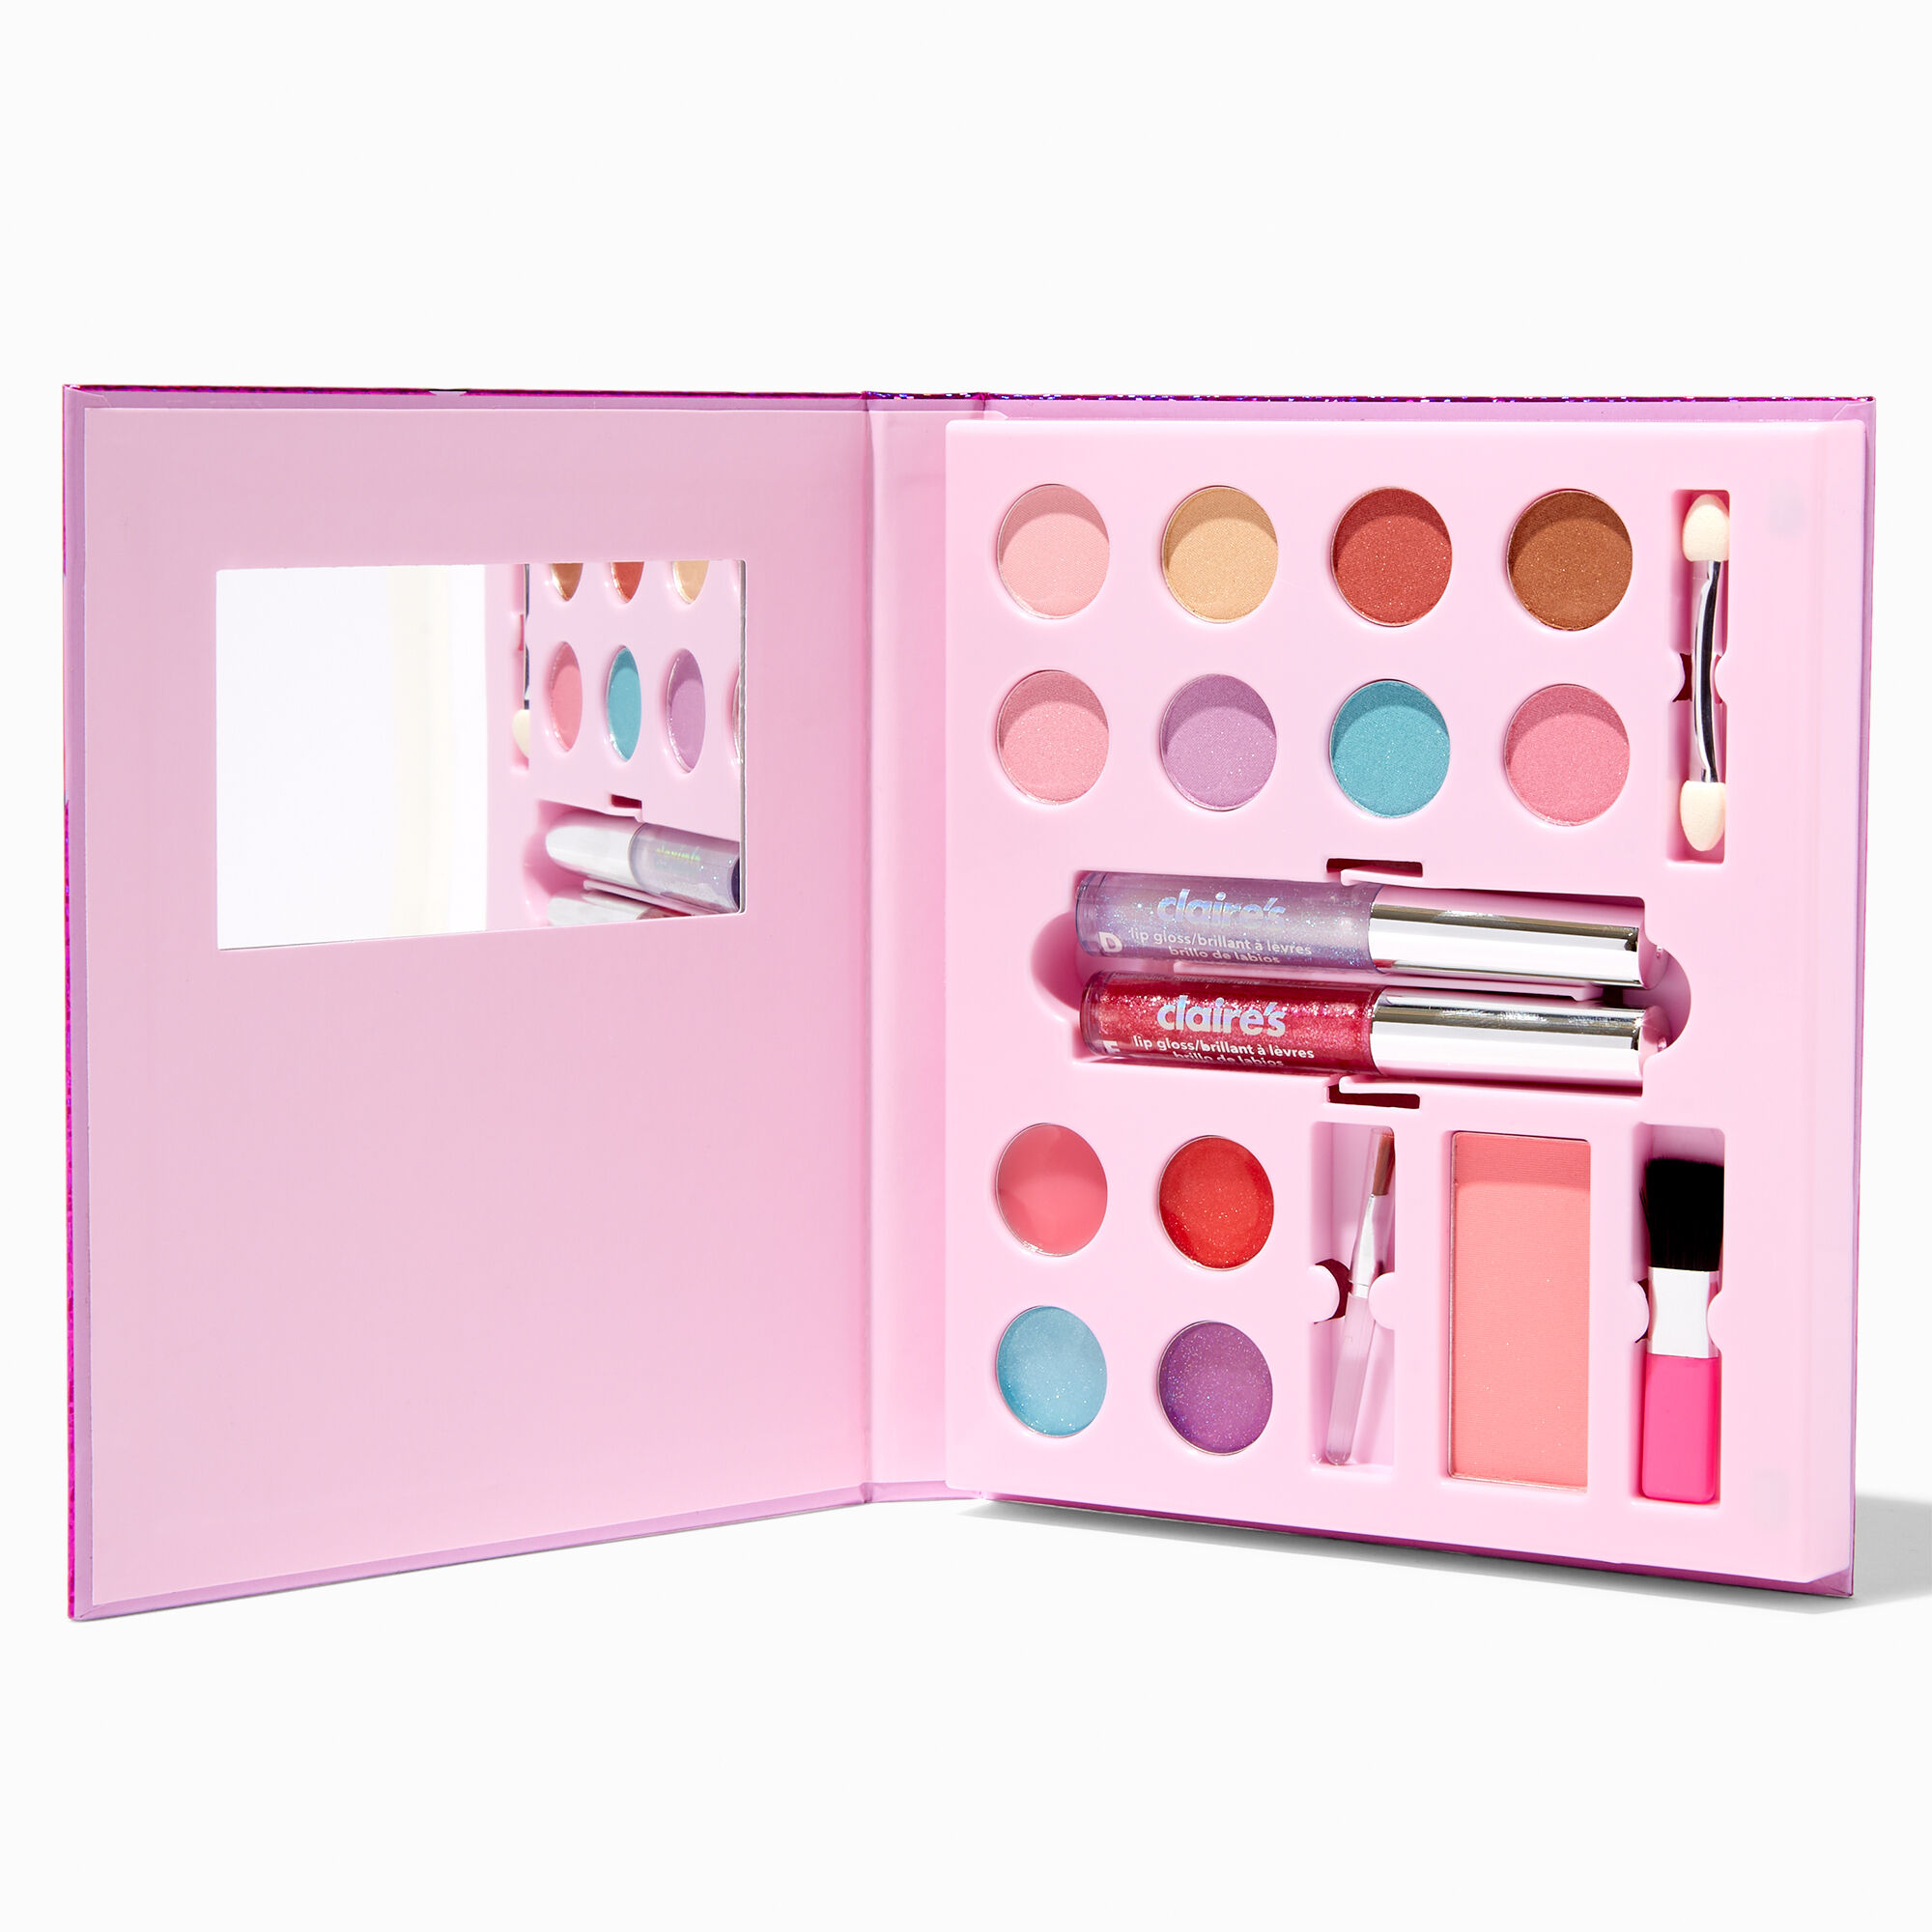 View Claires Checkered Daisy Makeup Set Pink information